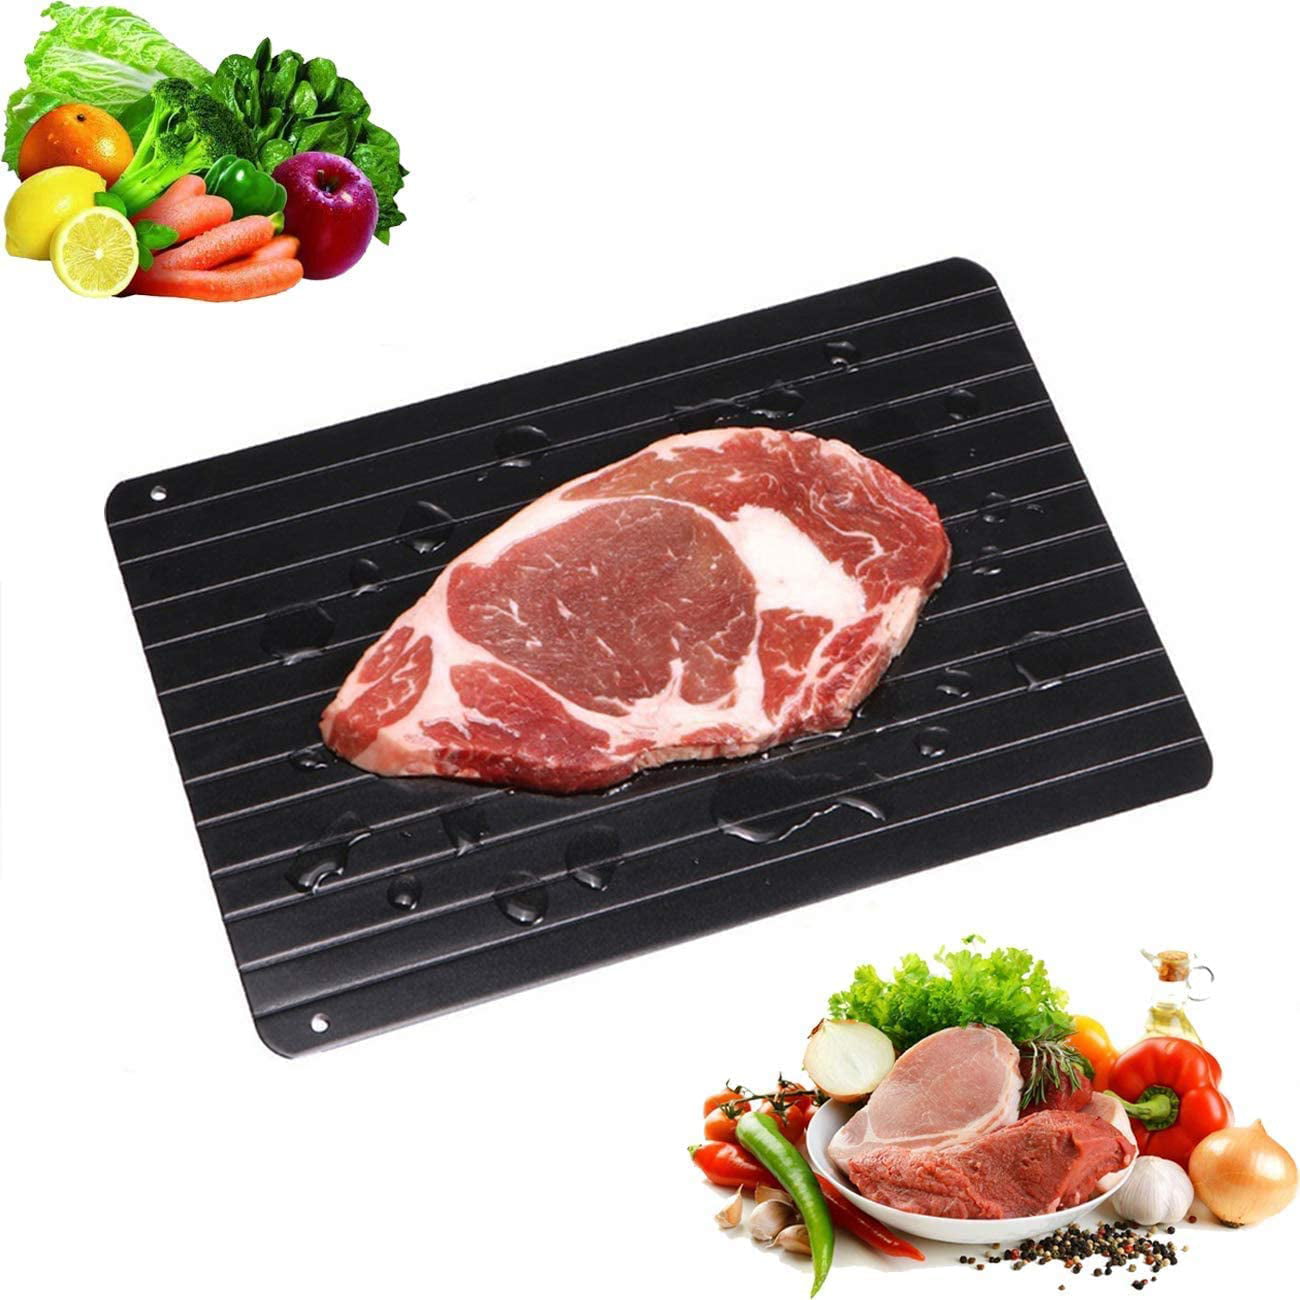 Quick Defrost Tray Rapid Thaw Plate Board for Defrosting Meat Frozen Food Metal